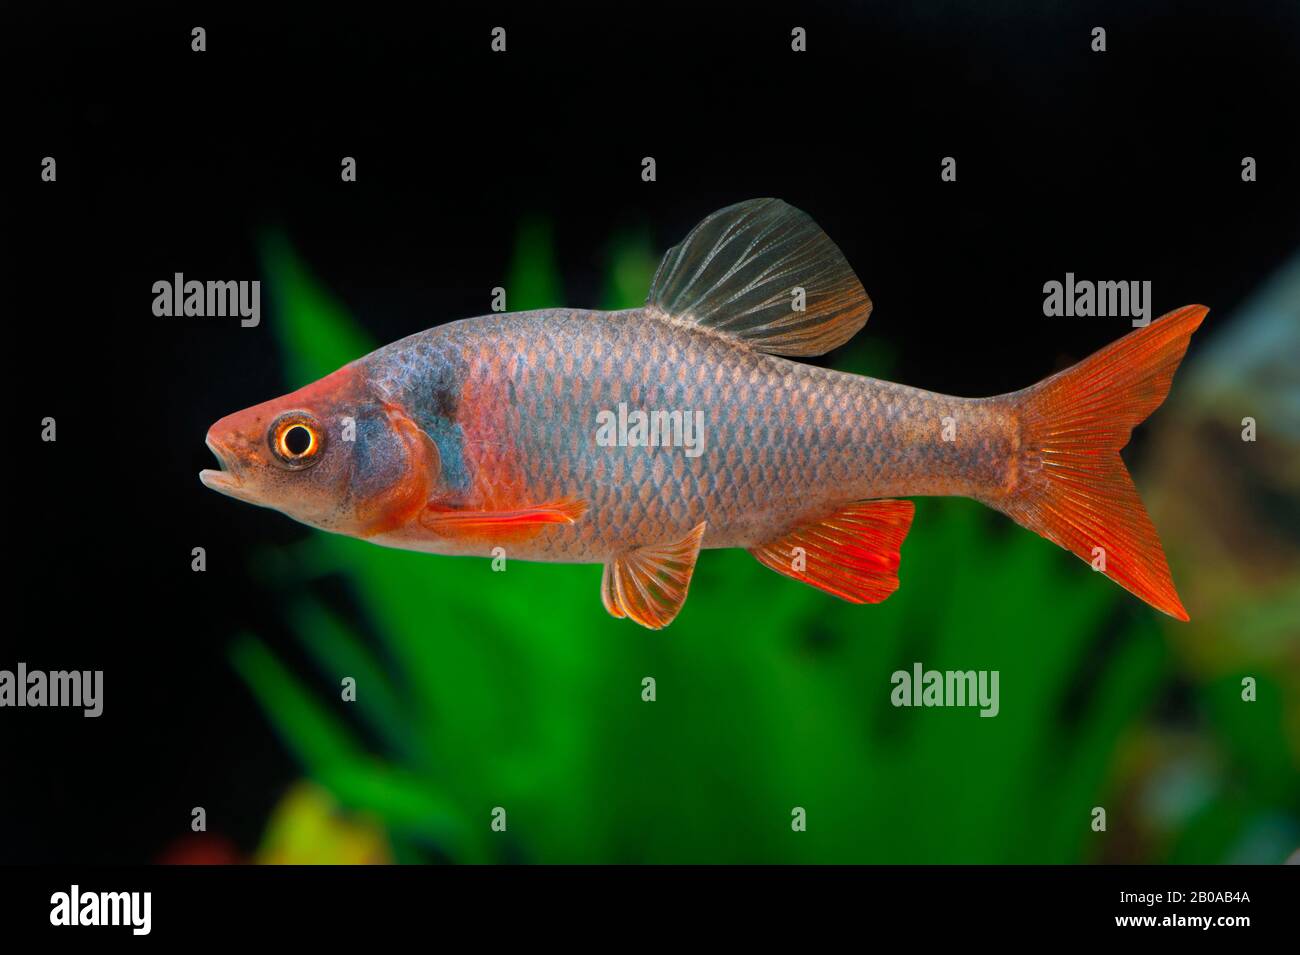 Red shiner (Notropis lutrensis, Cyprinella lutrensis), nuoto, vista laterale Foto Stock